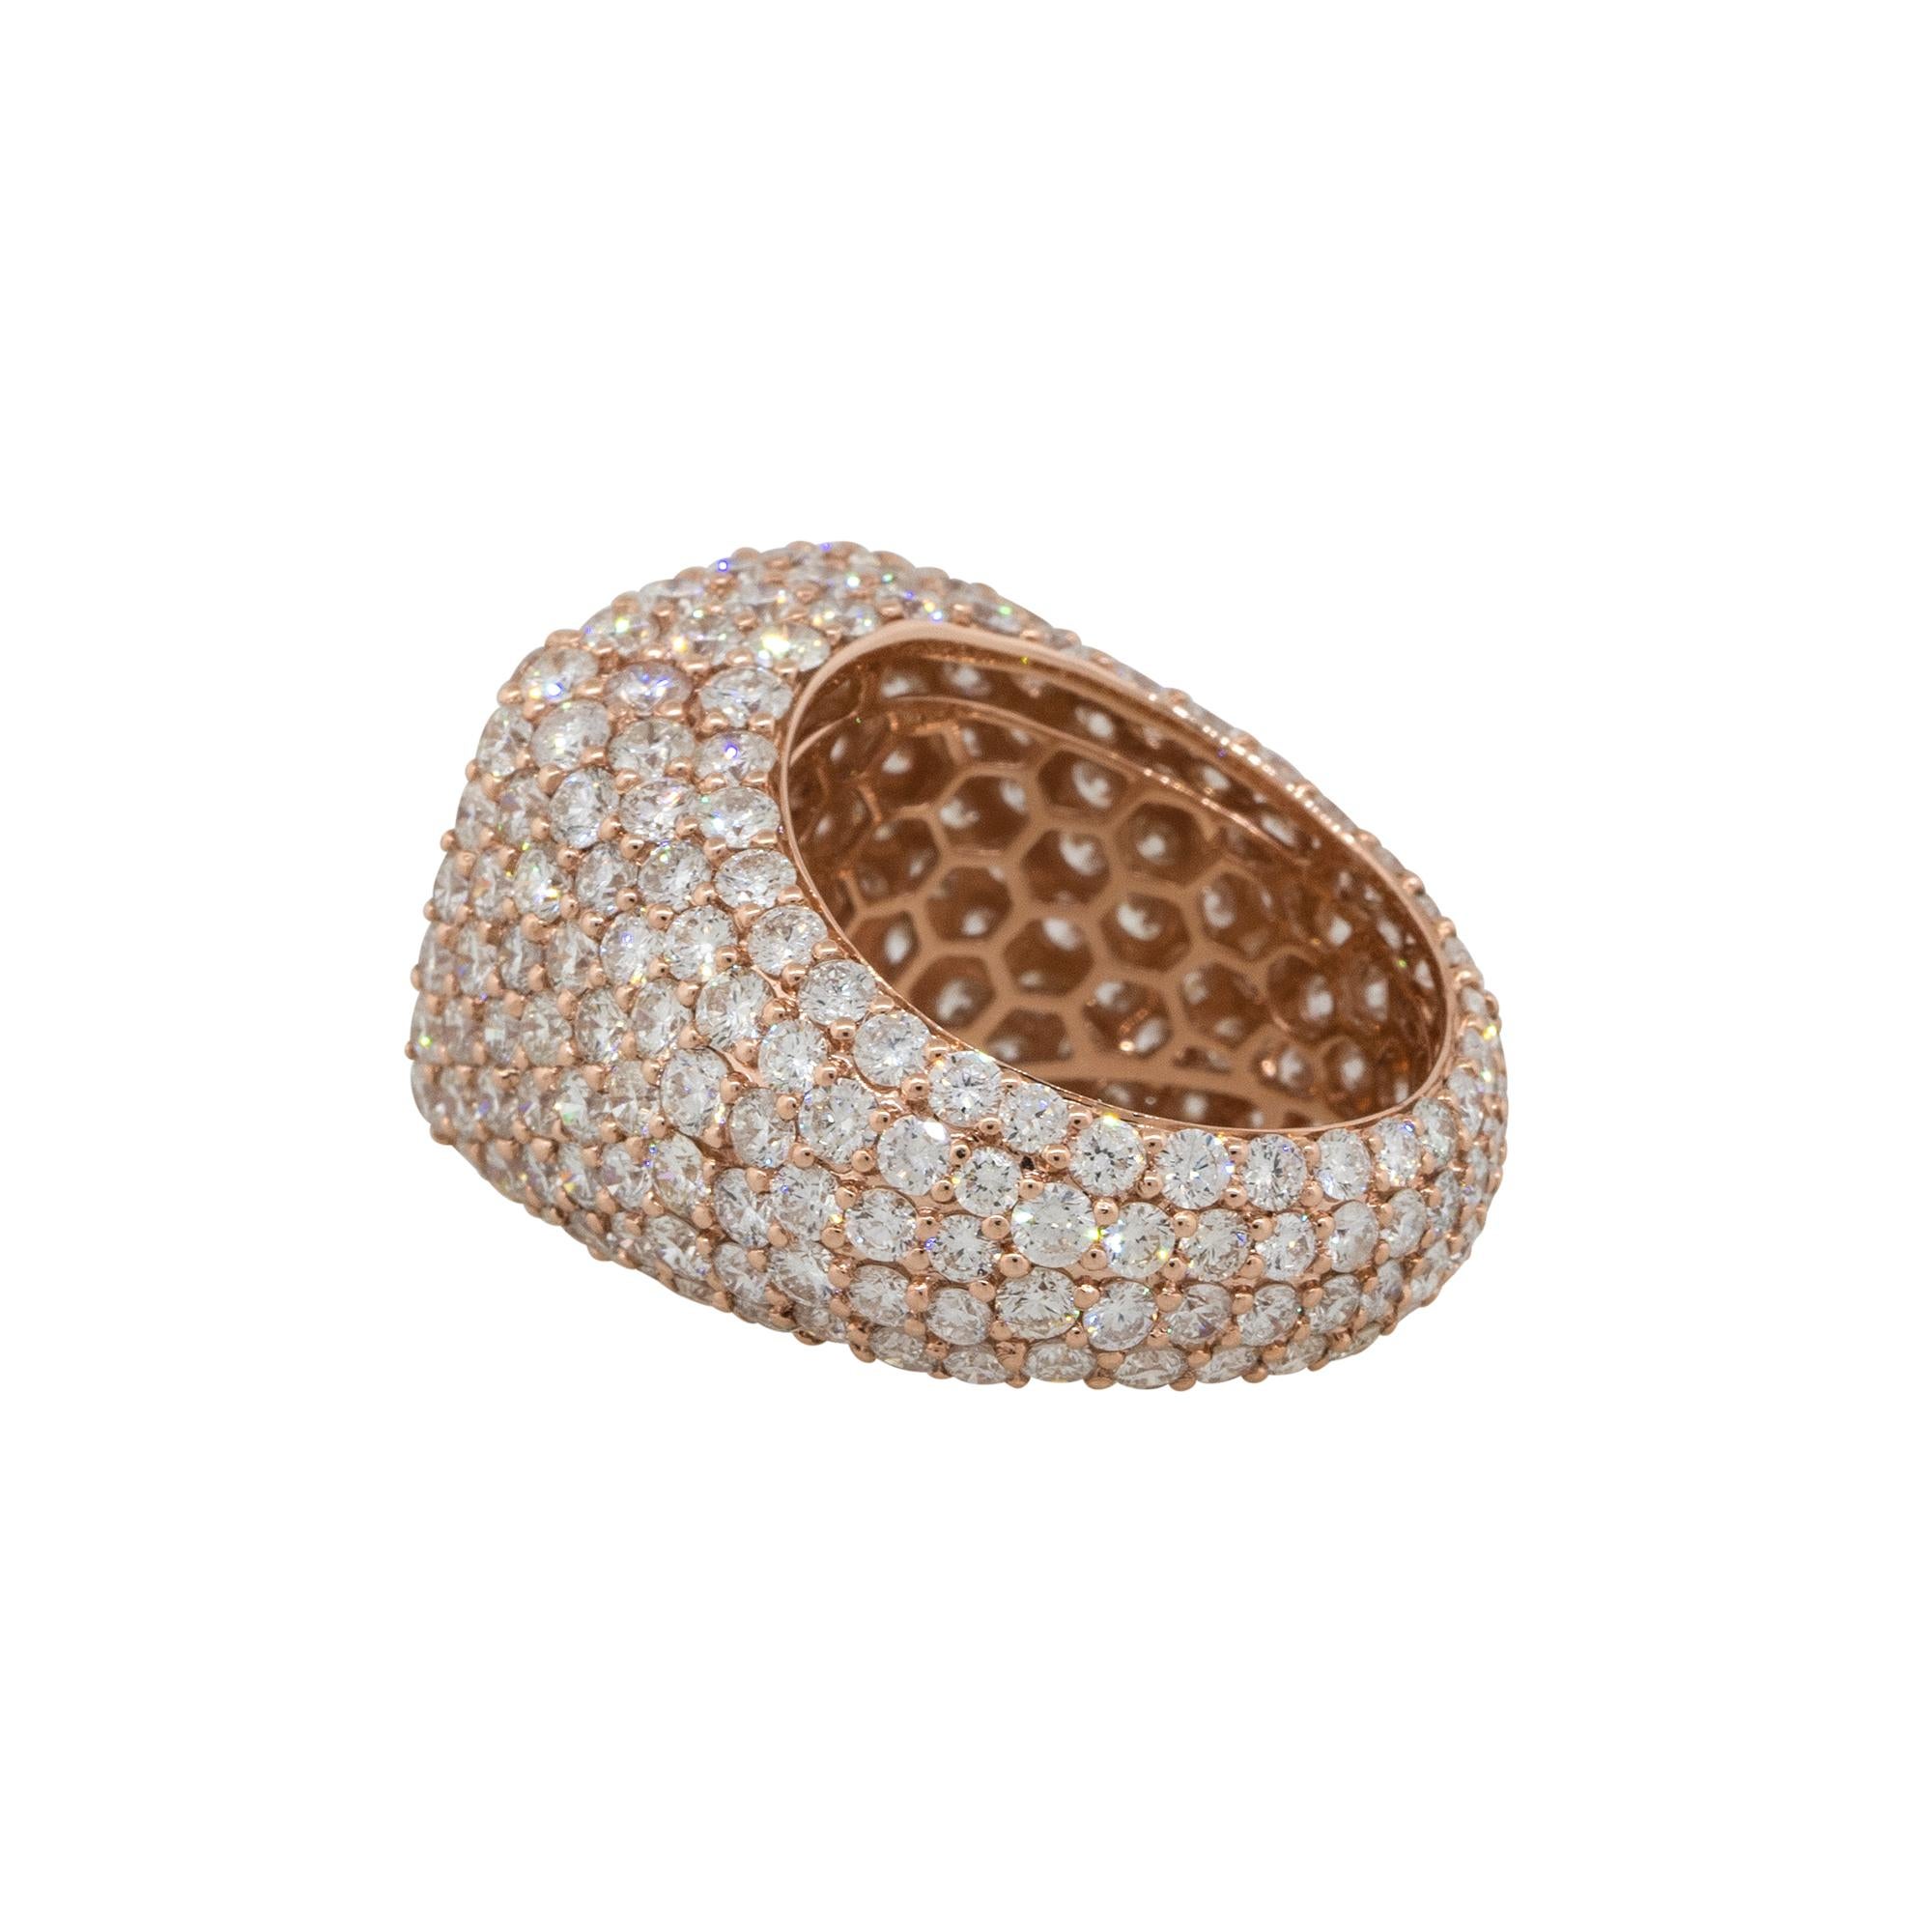 12.78 Carat Round Diamond Pave Mens Ring 14 Karat in Stock In New Condition For Sale In Boca Raton, FL